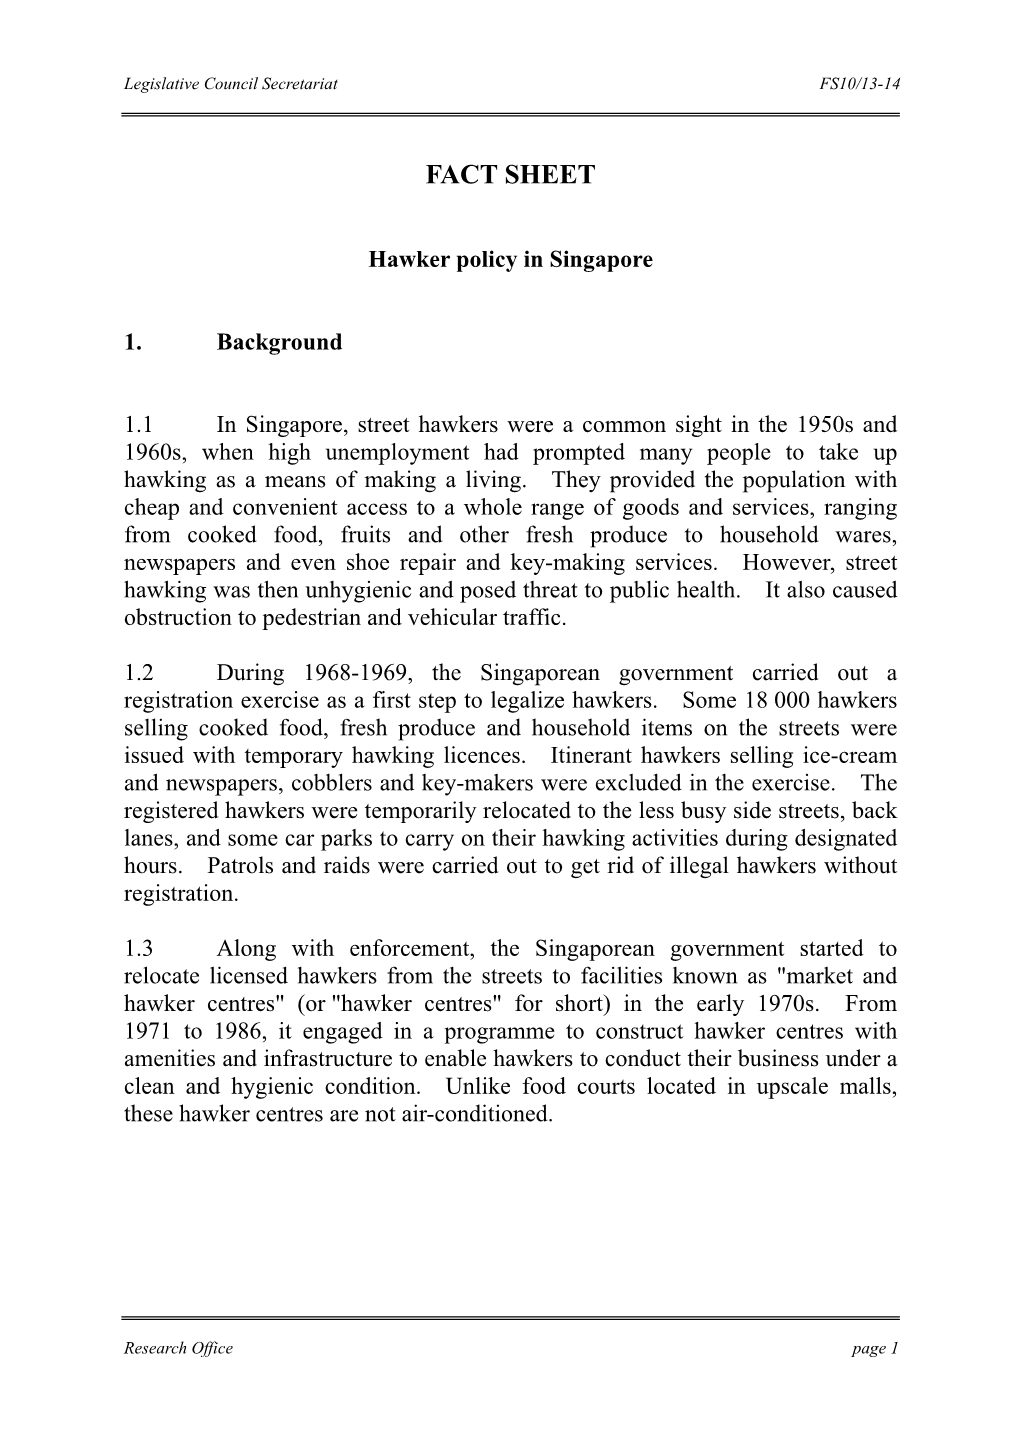 Hawker Policy in Singapore